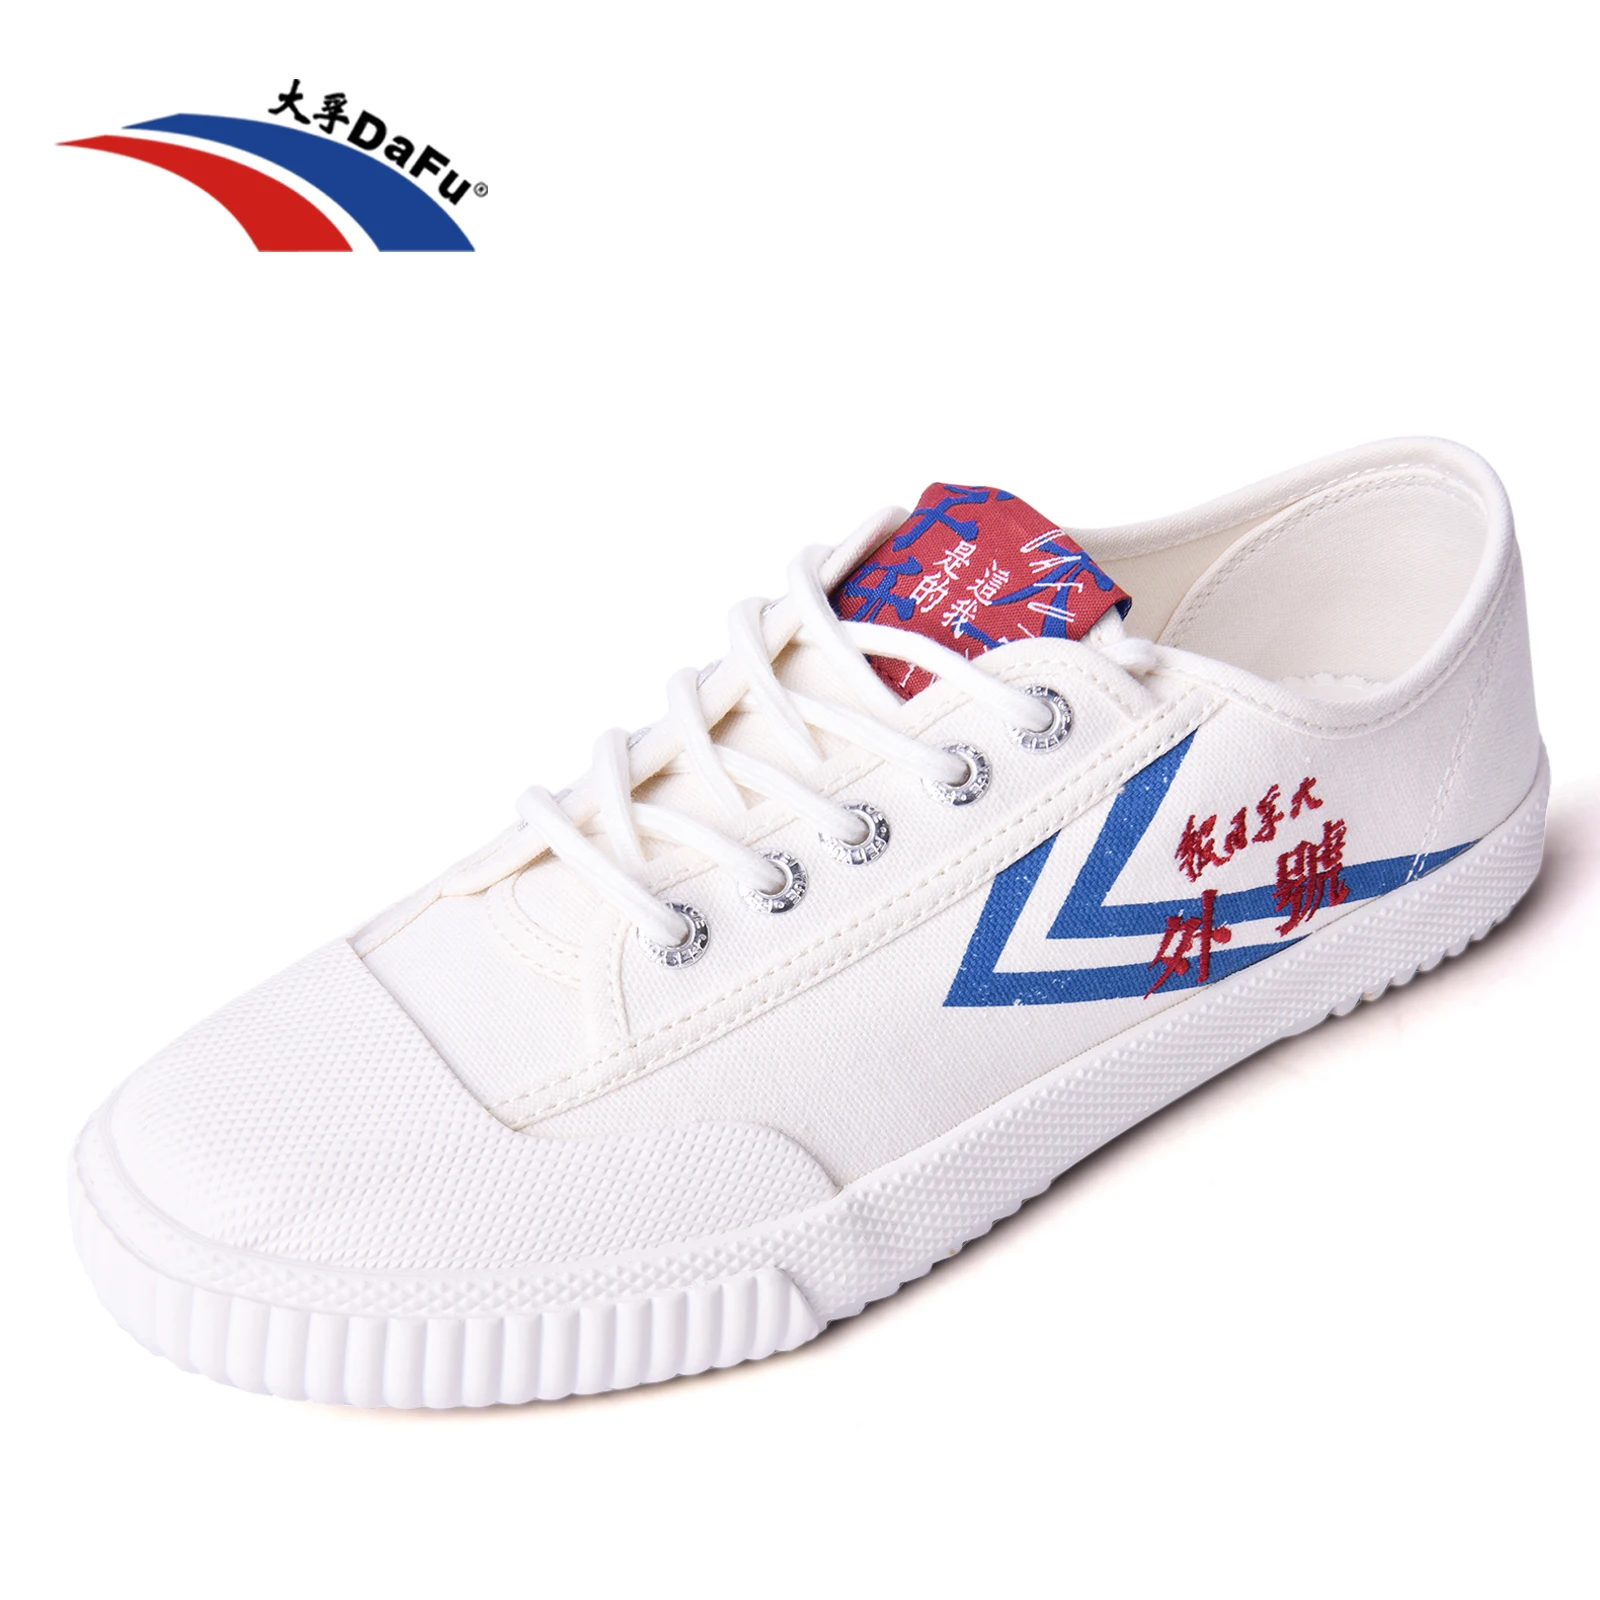 Dafu Shoes Improved Cooperation Original Sneakers Classic Style Martial Arts Shoes